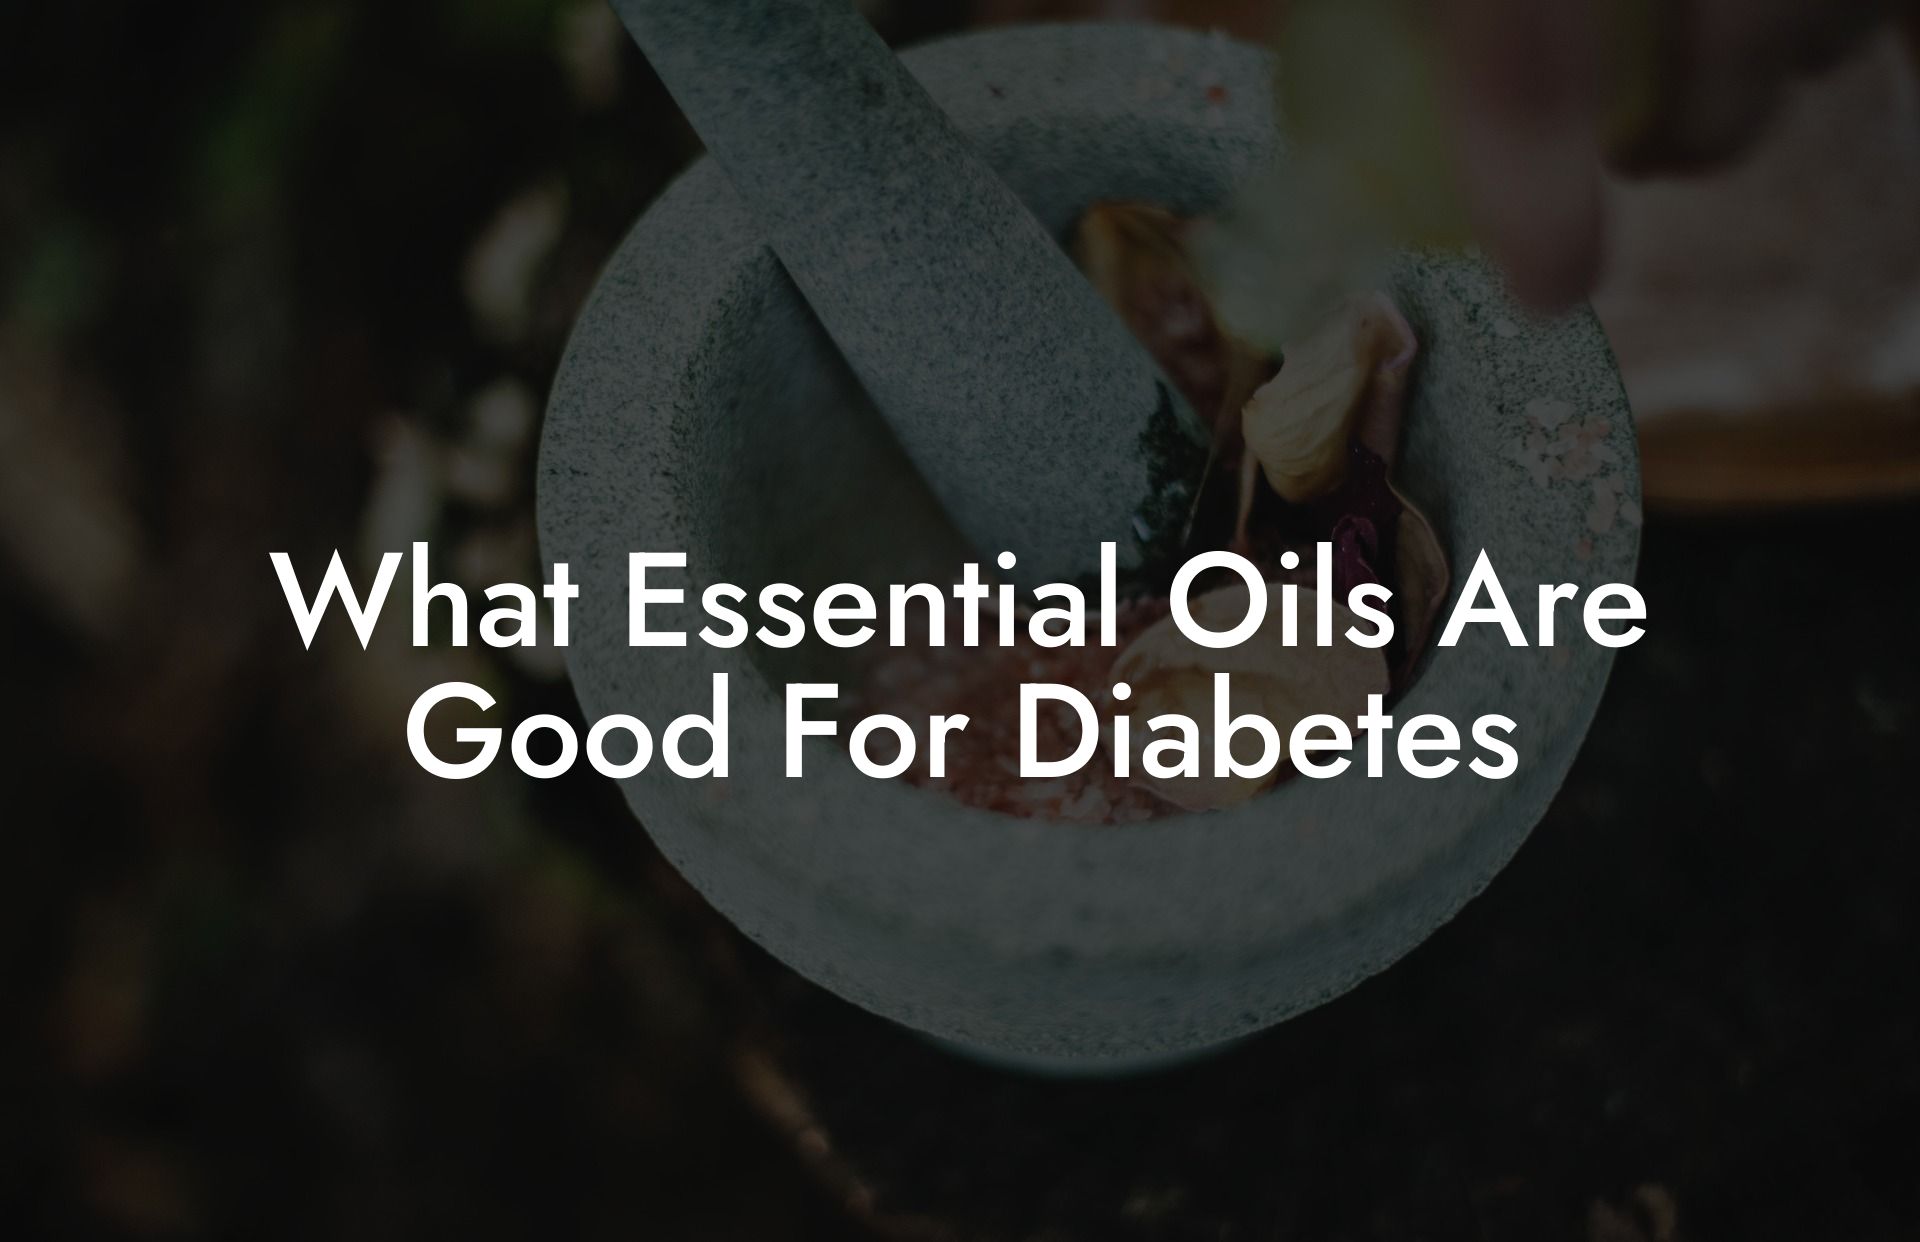 What Essential Oils Are Good For Diabetes